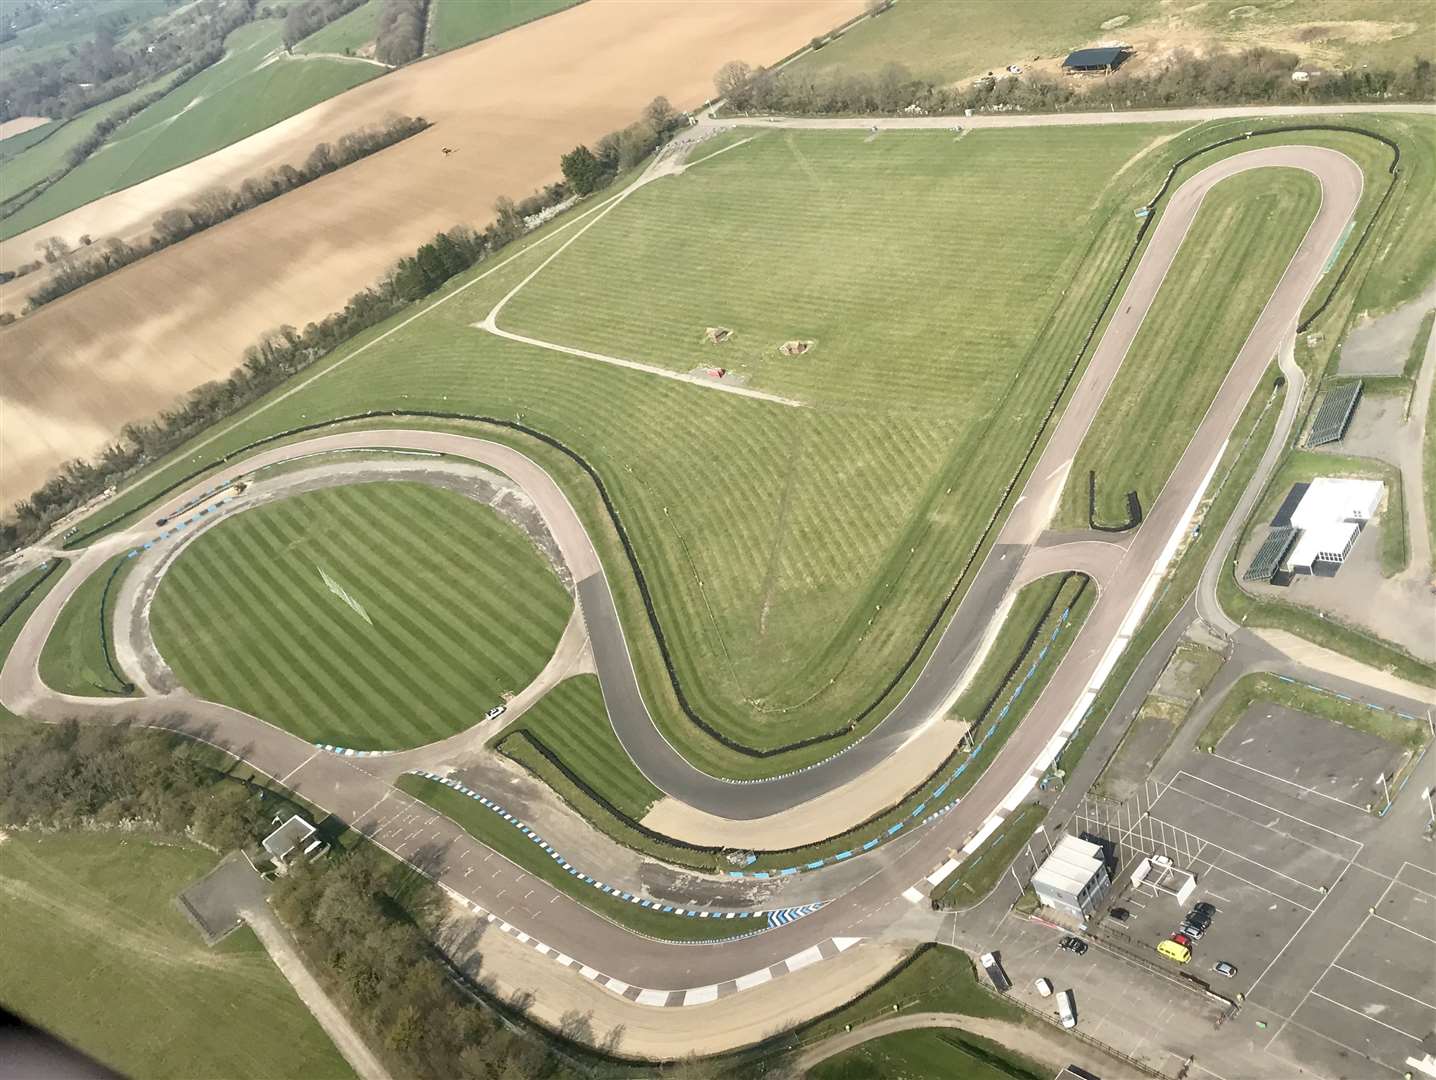 Lydden Hill race track